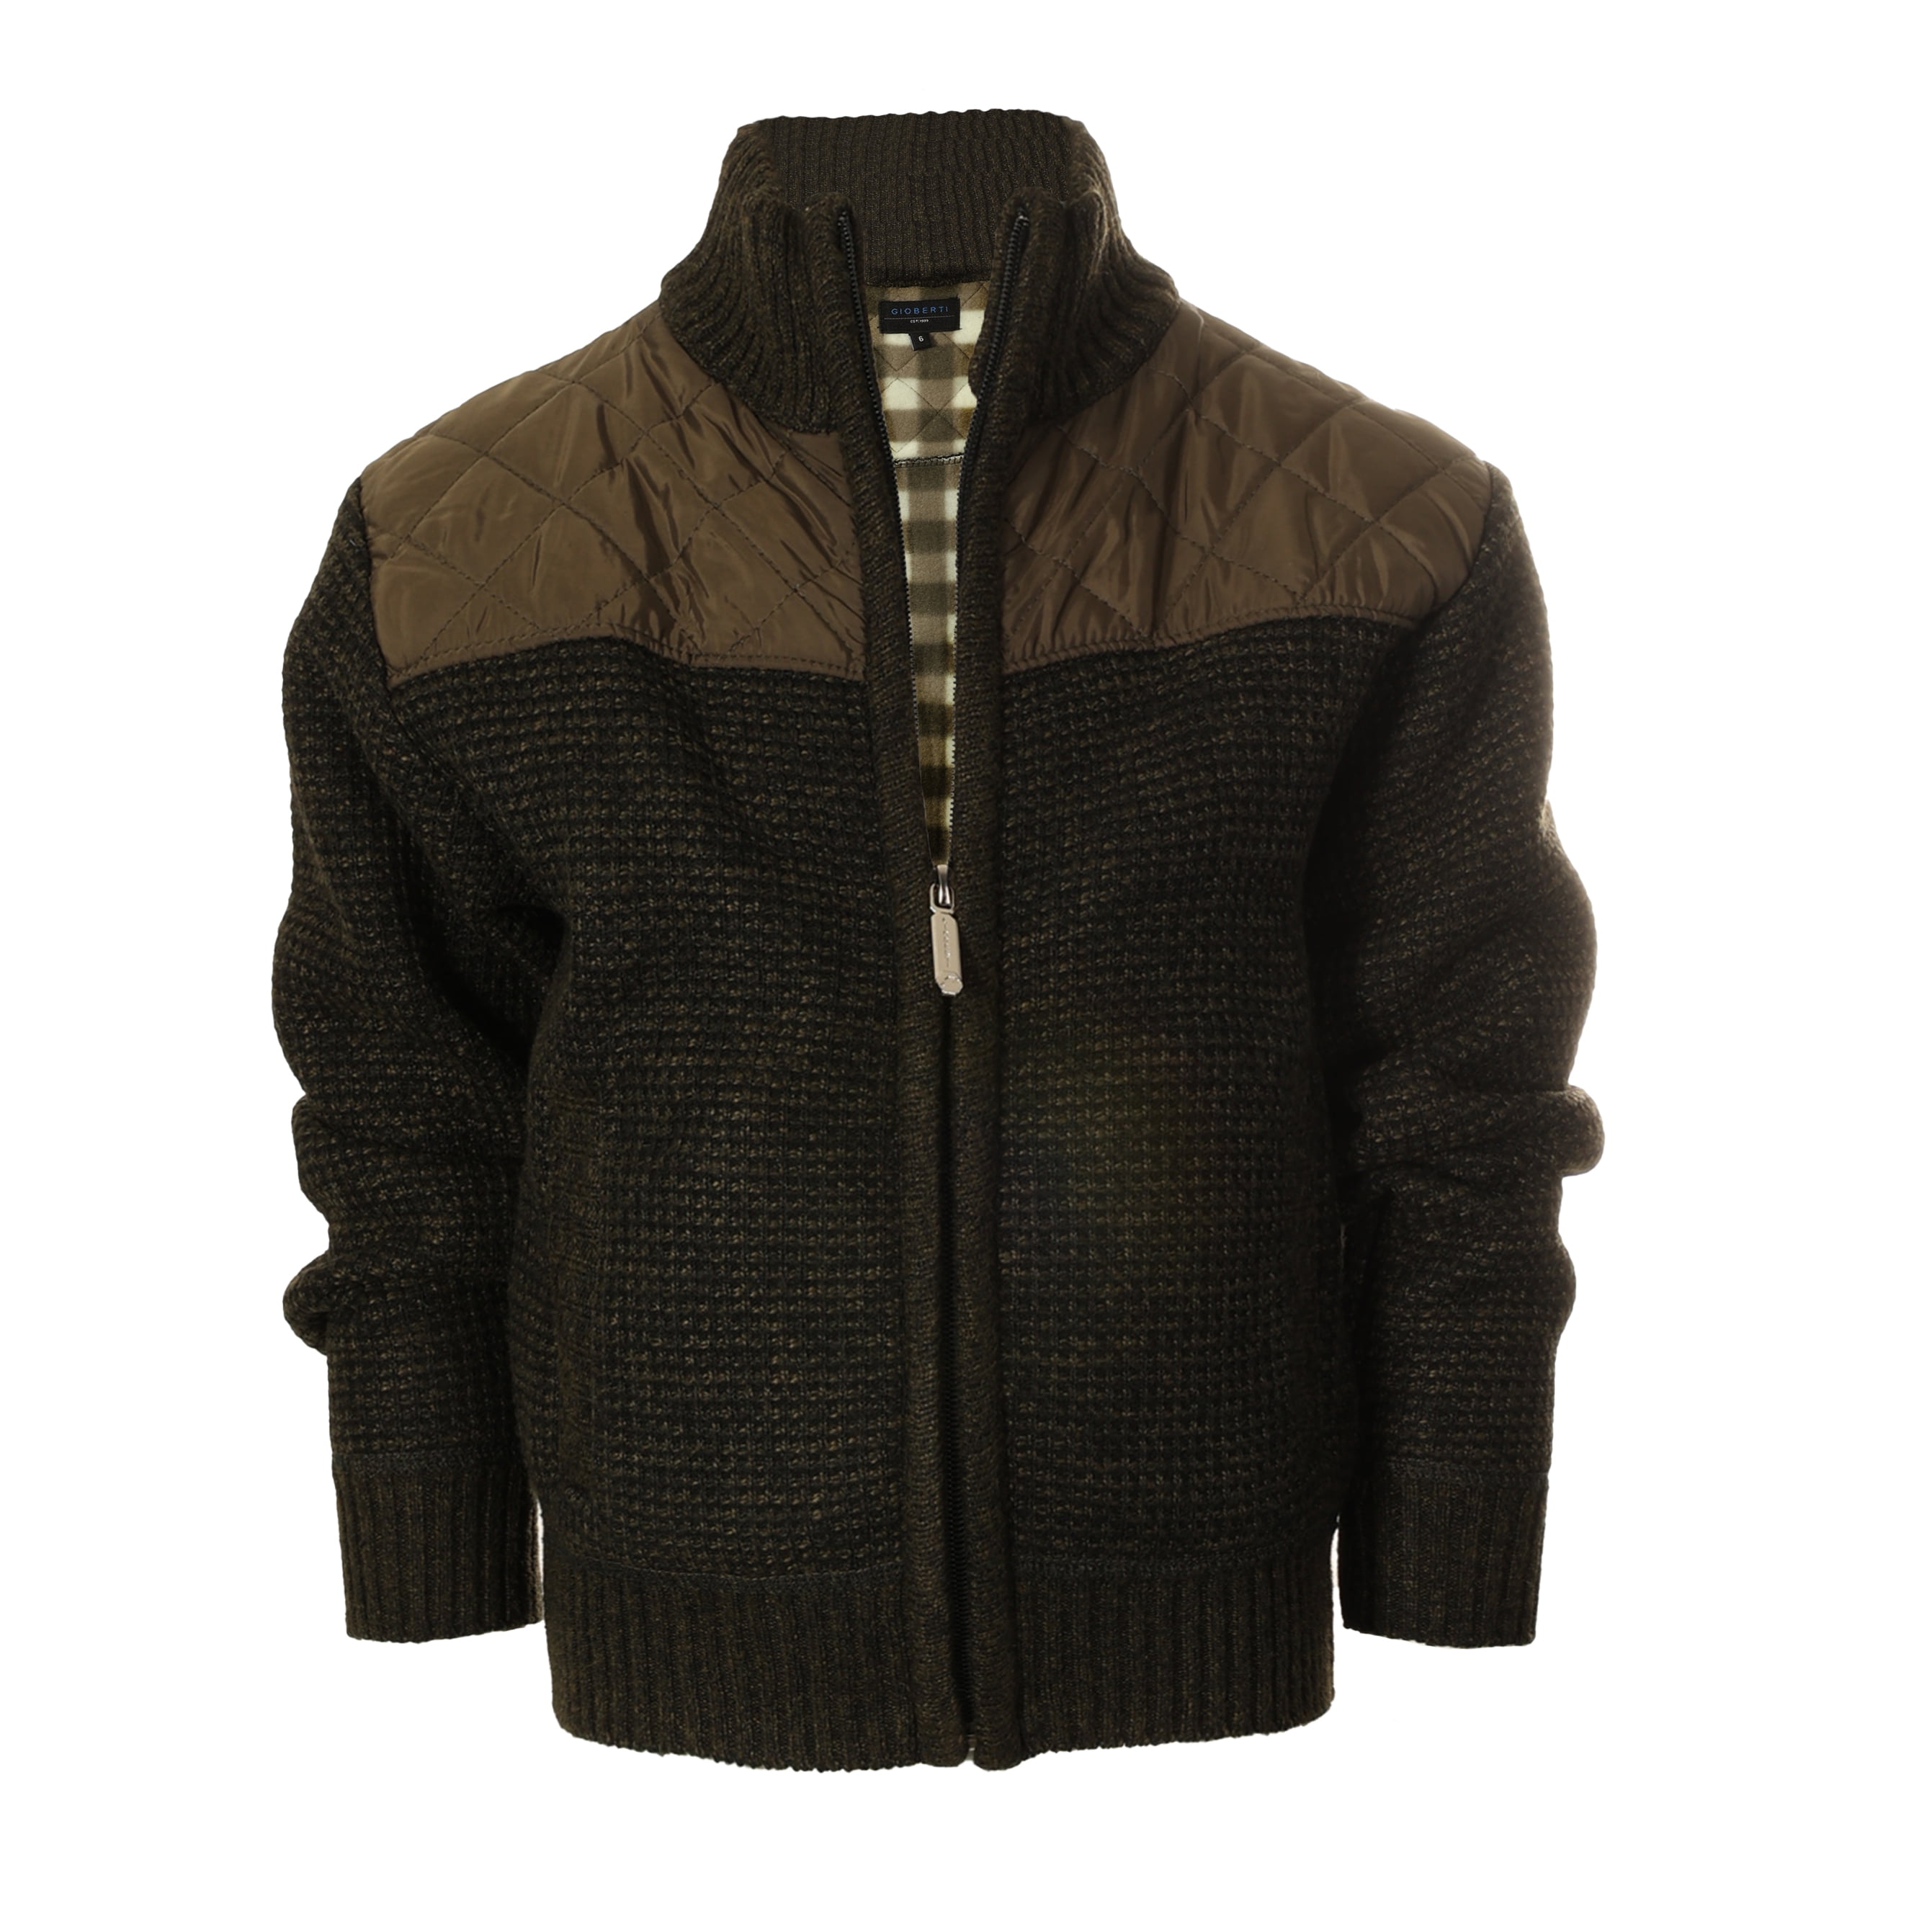 Gioberti Boy's Knitted Full Zip Cardigan Sweater with Soft Brushed Flannel Lining 